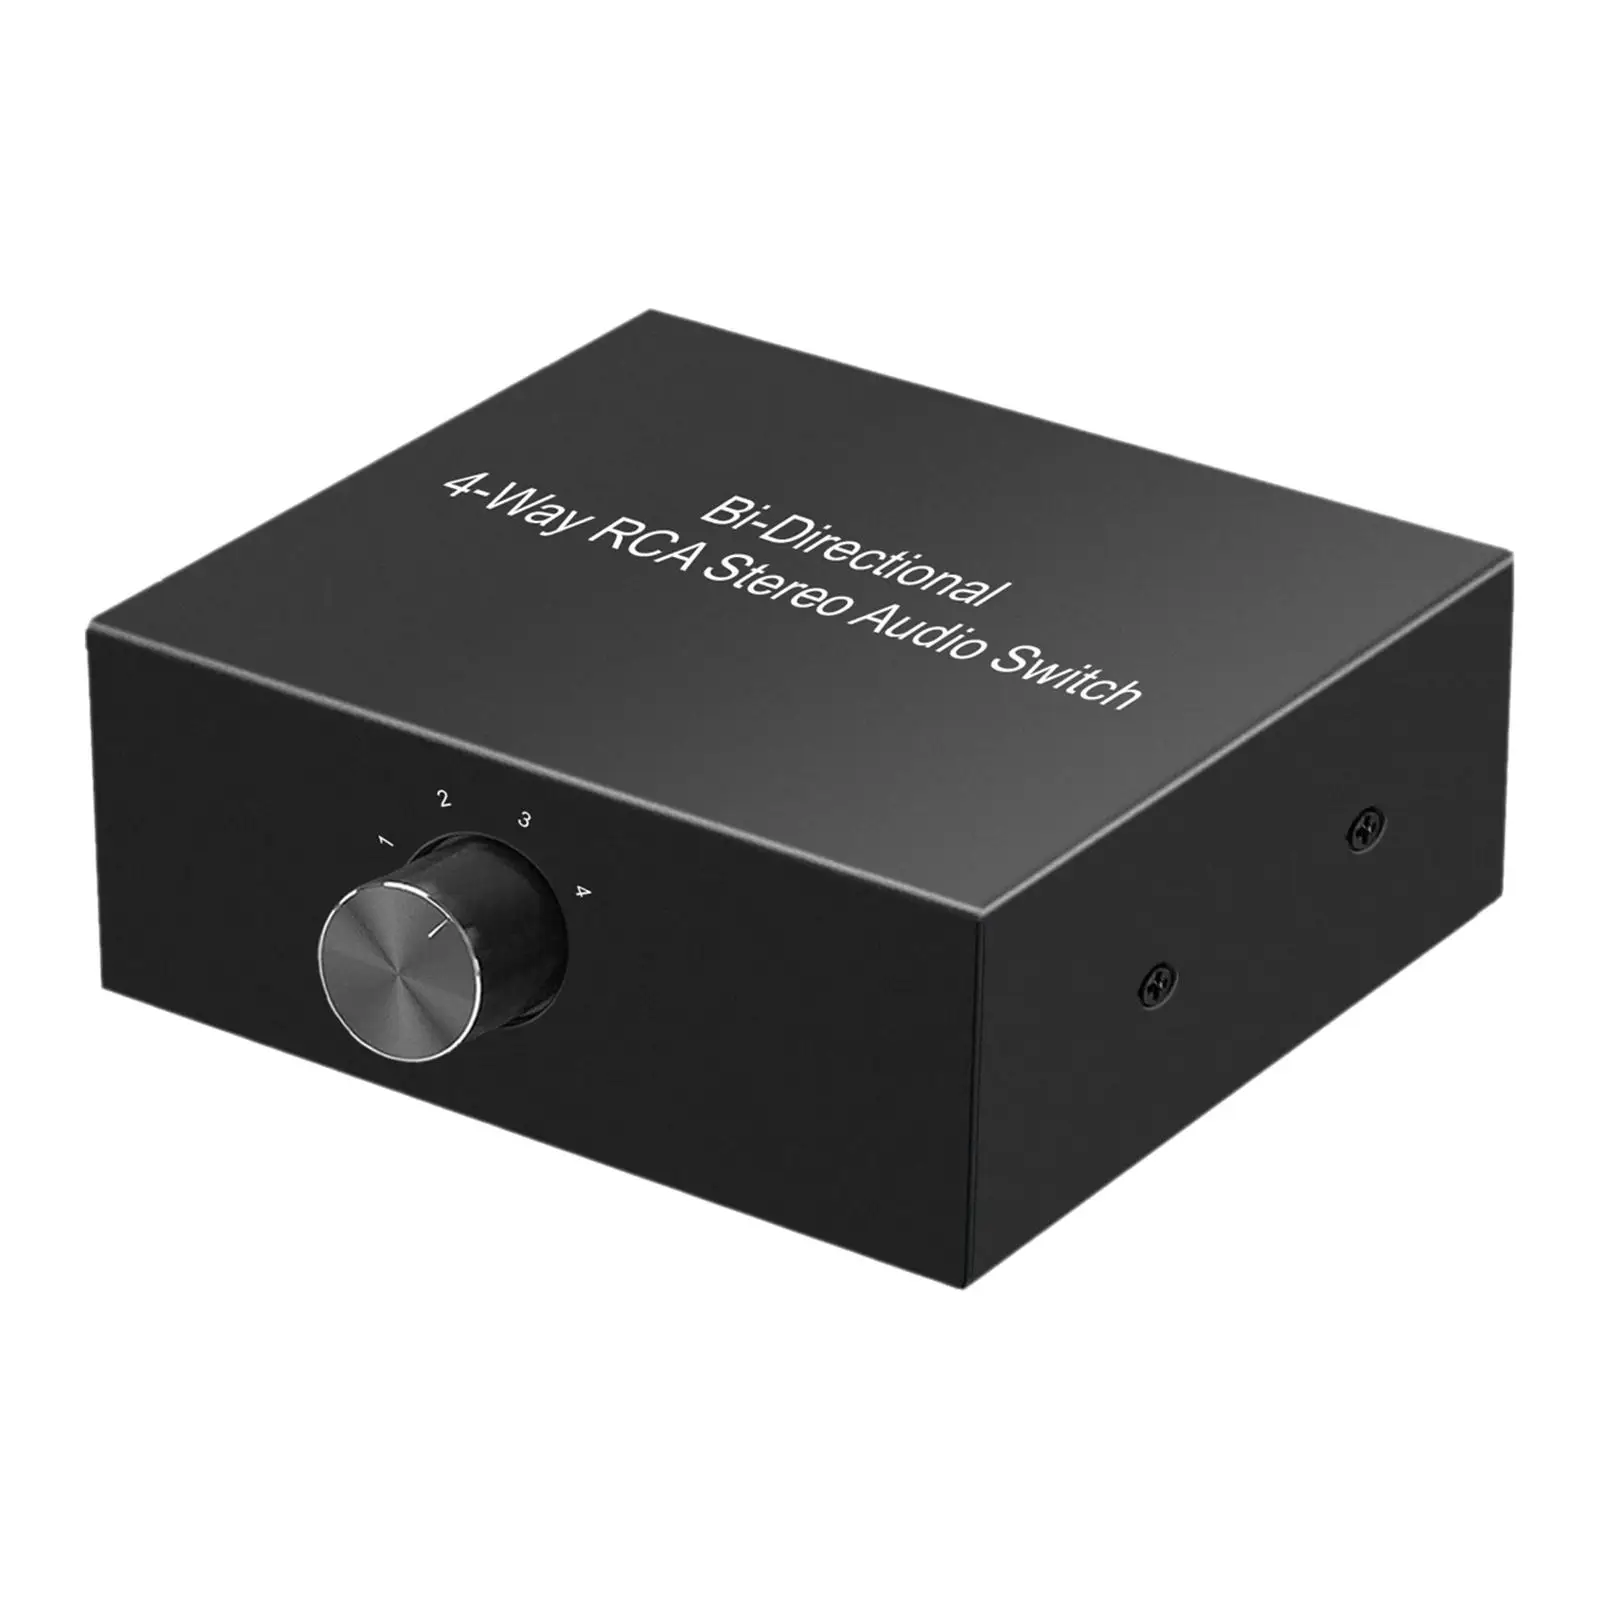 4 Ports Bi-directional R L RCA Audio Switcher Box Plug and Play Audio Switch Splitter Distributor for Game Console Headphone TV